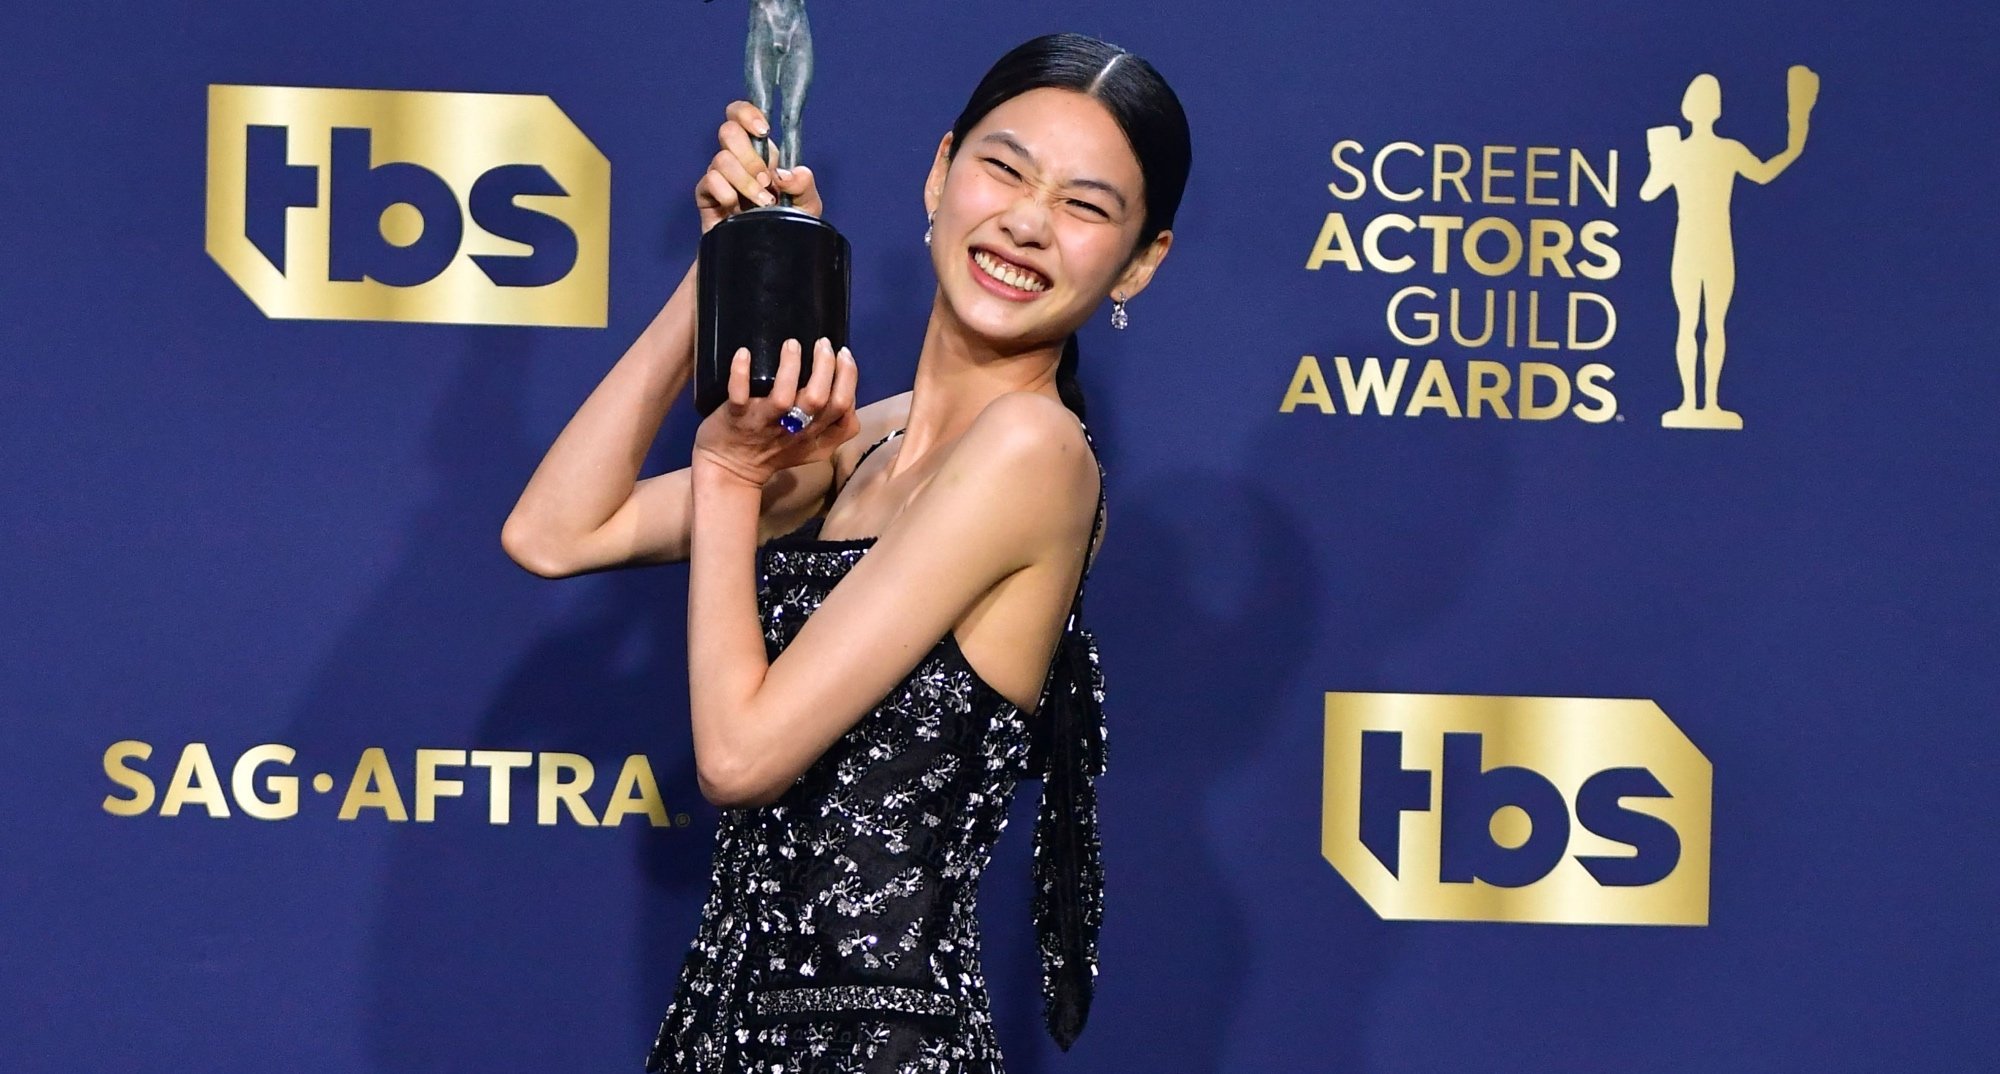 Squid Game” Star Hoyeon Jung's Hairstylist Jenny Cho Shares How She  Achieved Her SAG Awards 2022 Look